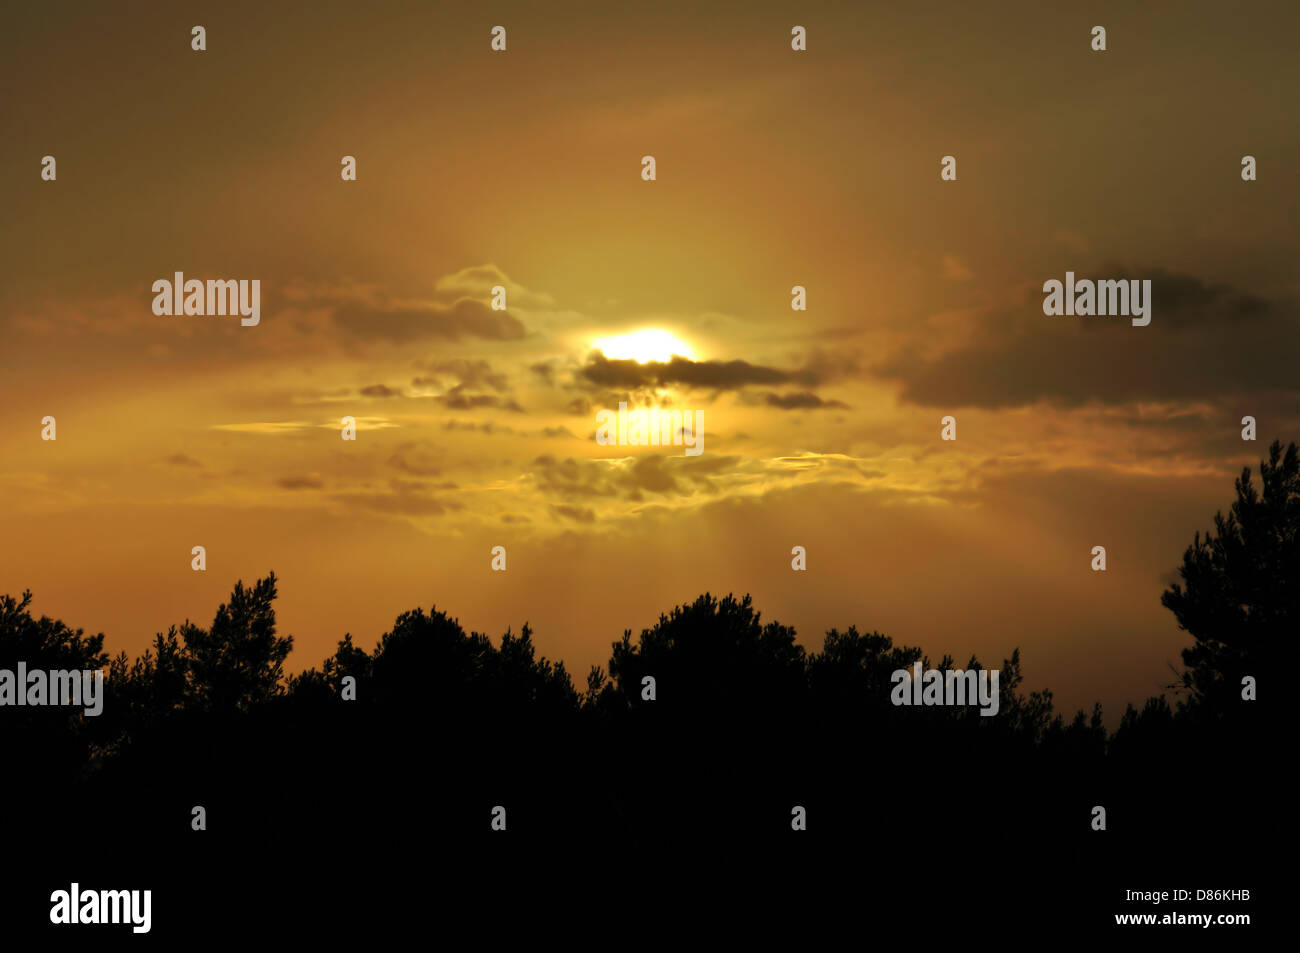 Evening sky behind clouds. Orange sunset and tree silhouettes. Stock Photo